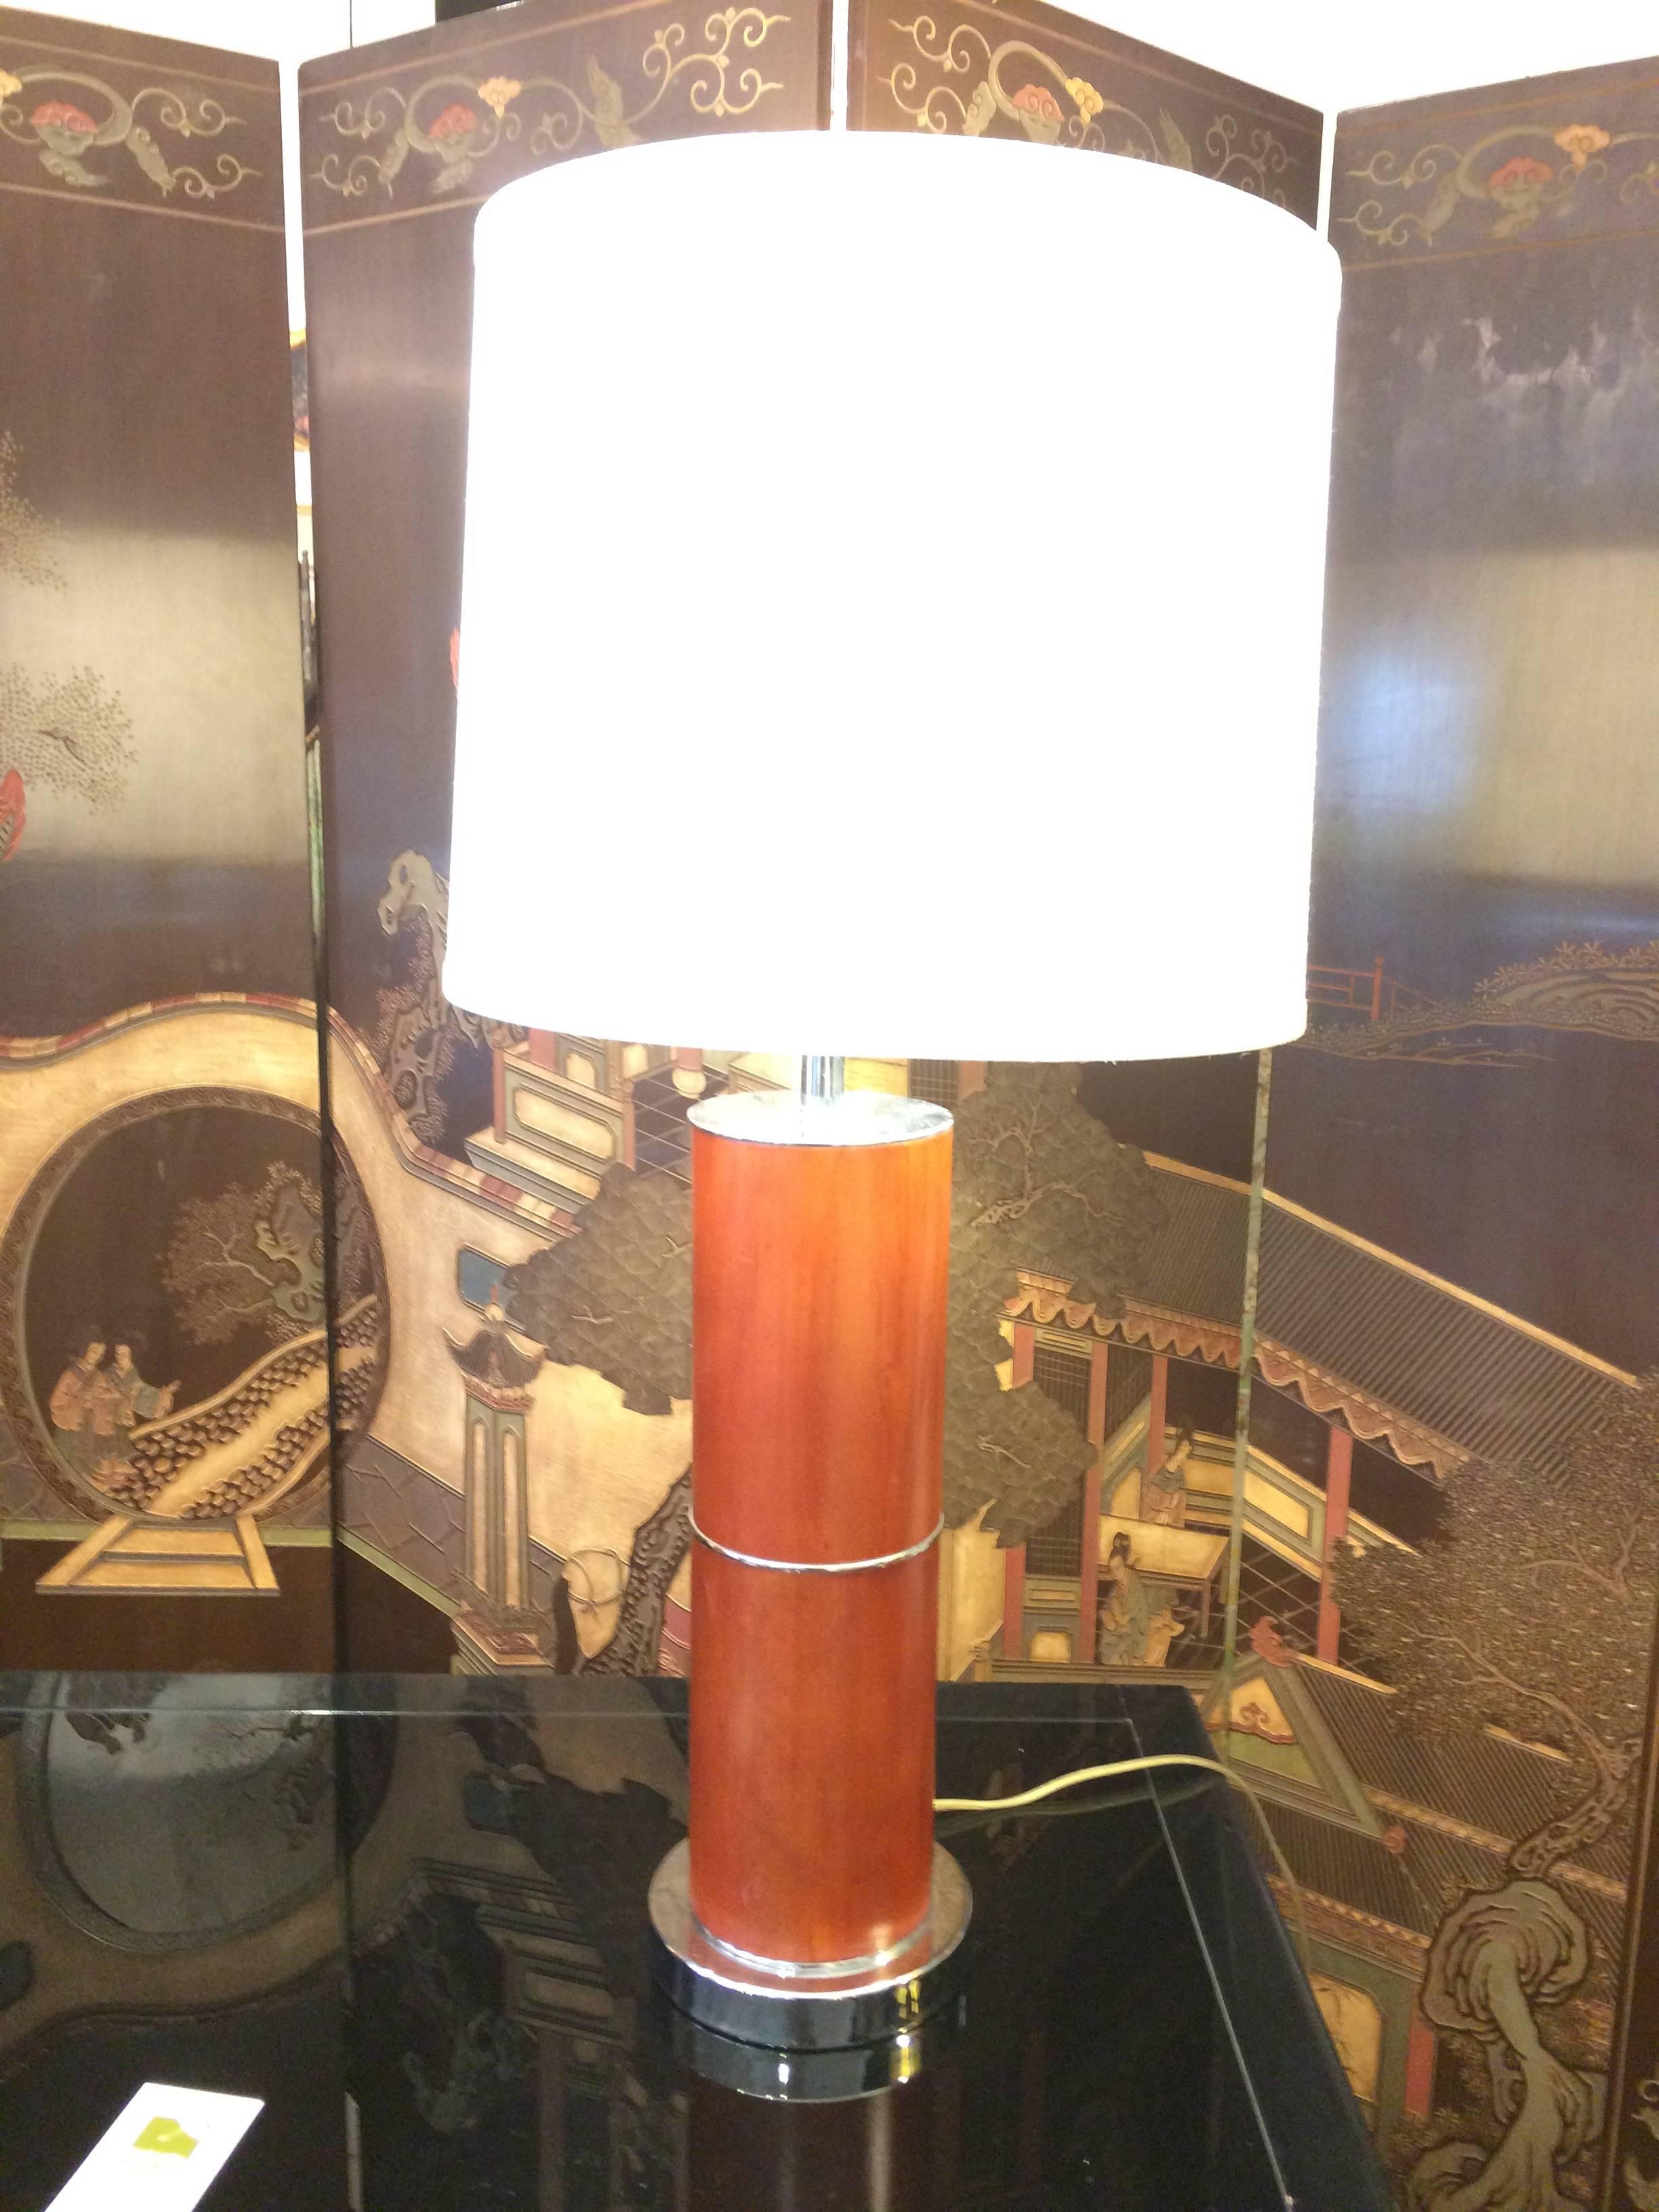 Handsome and clean lines describe this pair of burled wood and chrome columnar lamps. Custom shades; ball finials.
Measure: 6 inch diameter base.